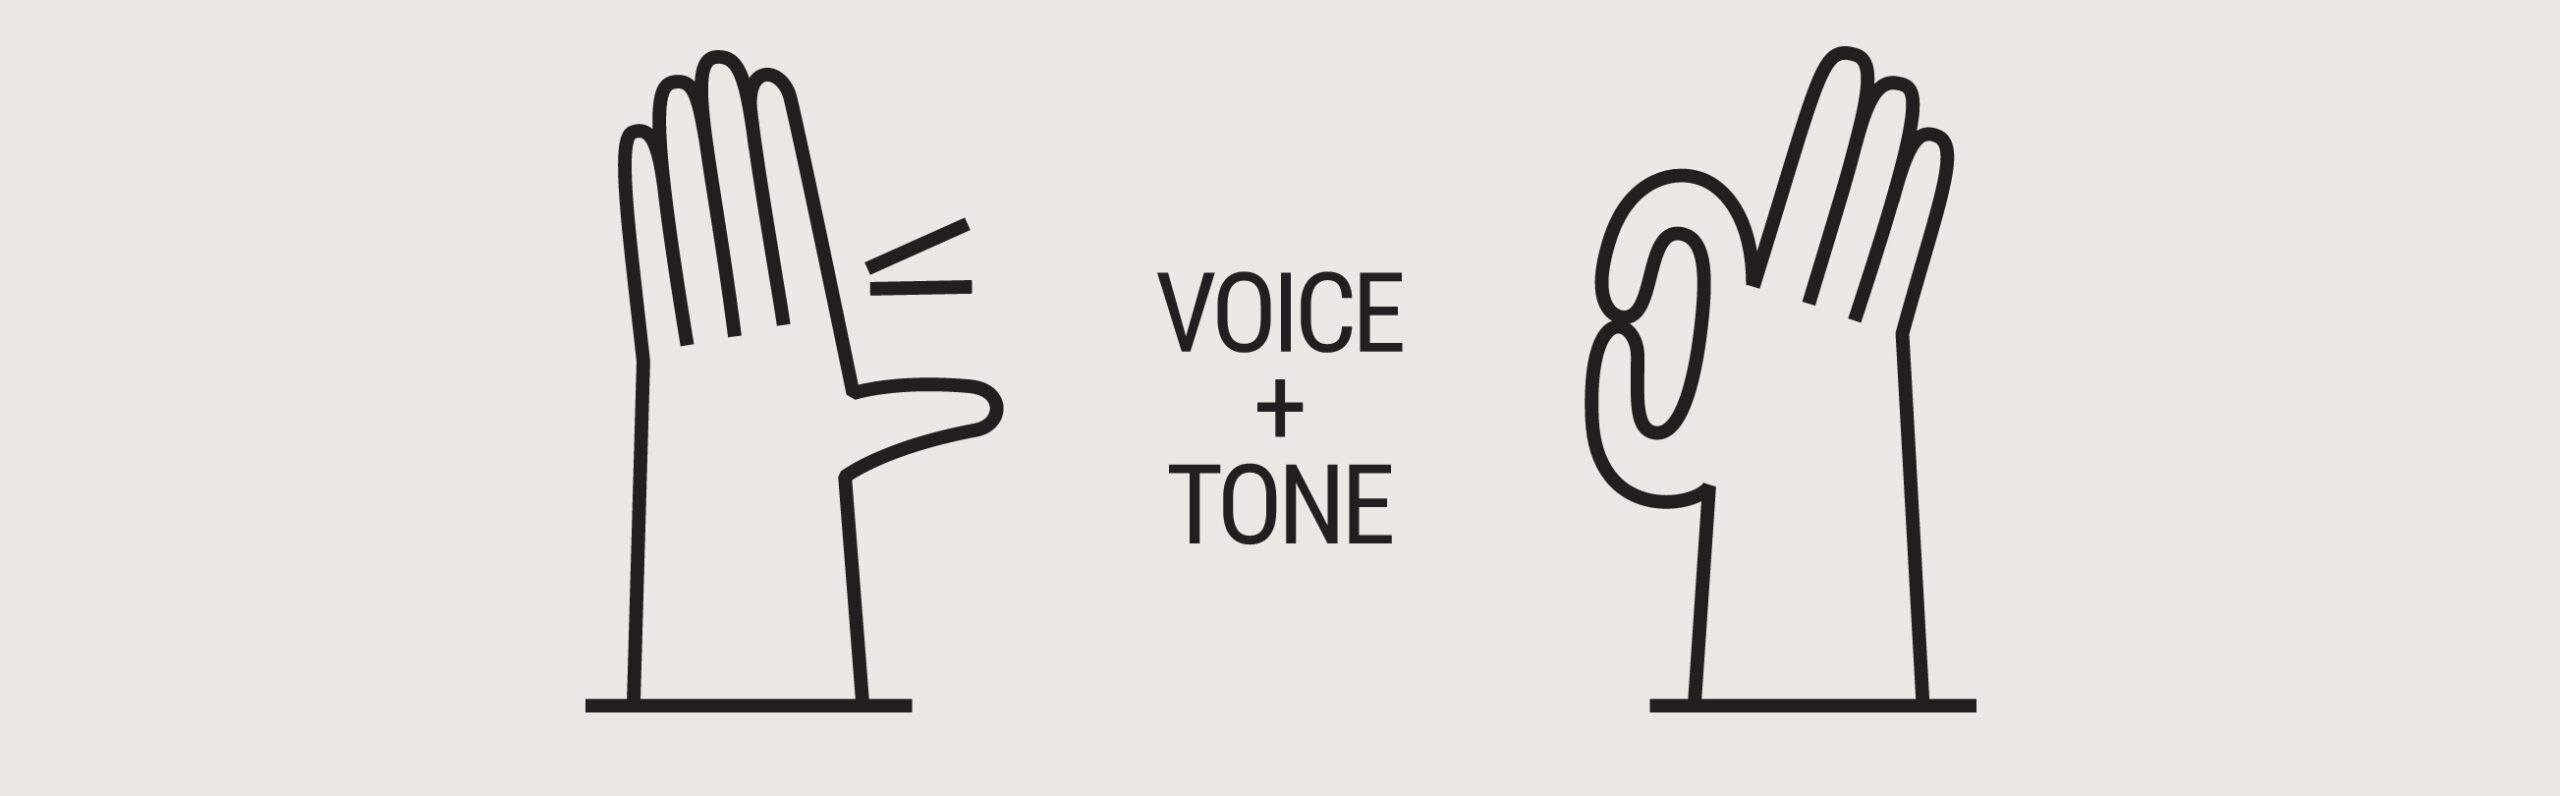 Brand Voice vs. Brand Tone: Understanding the Difference